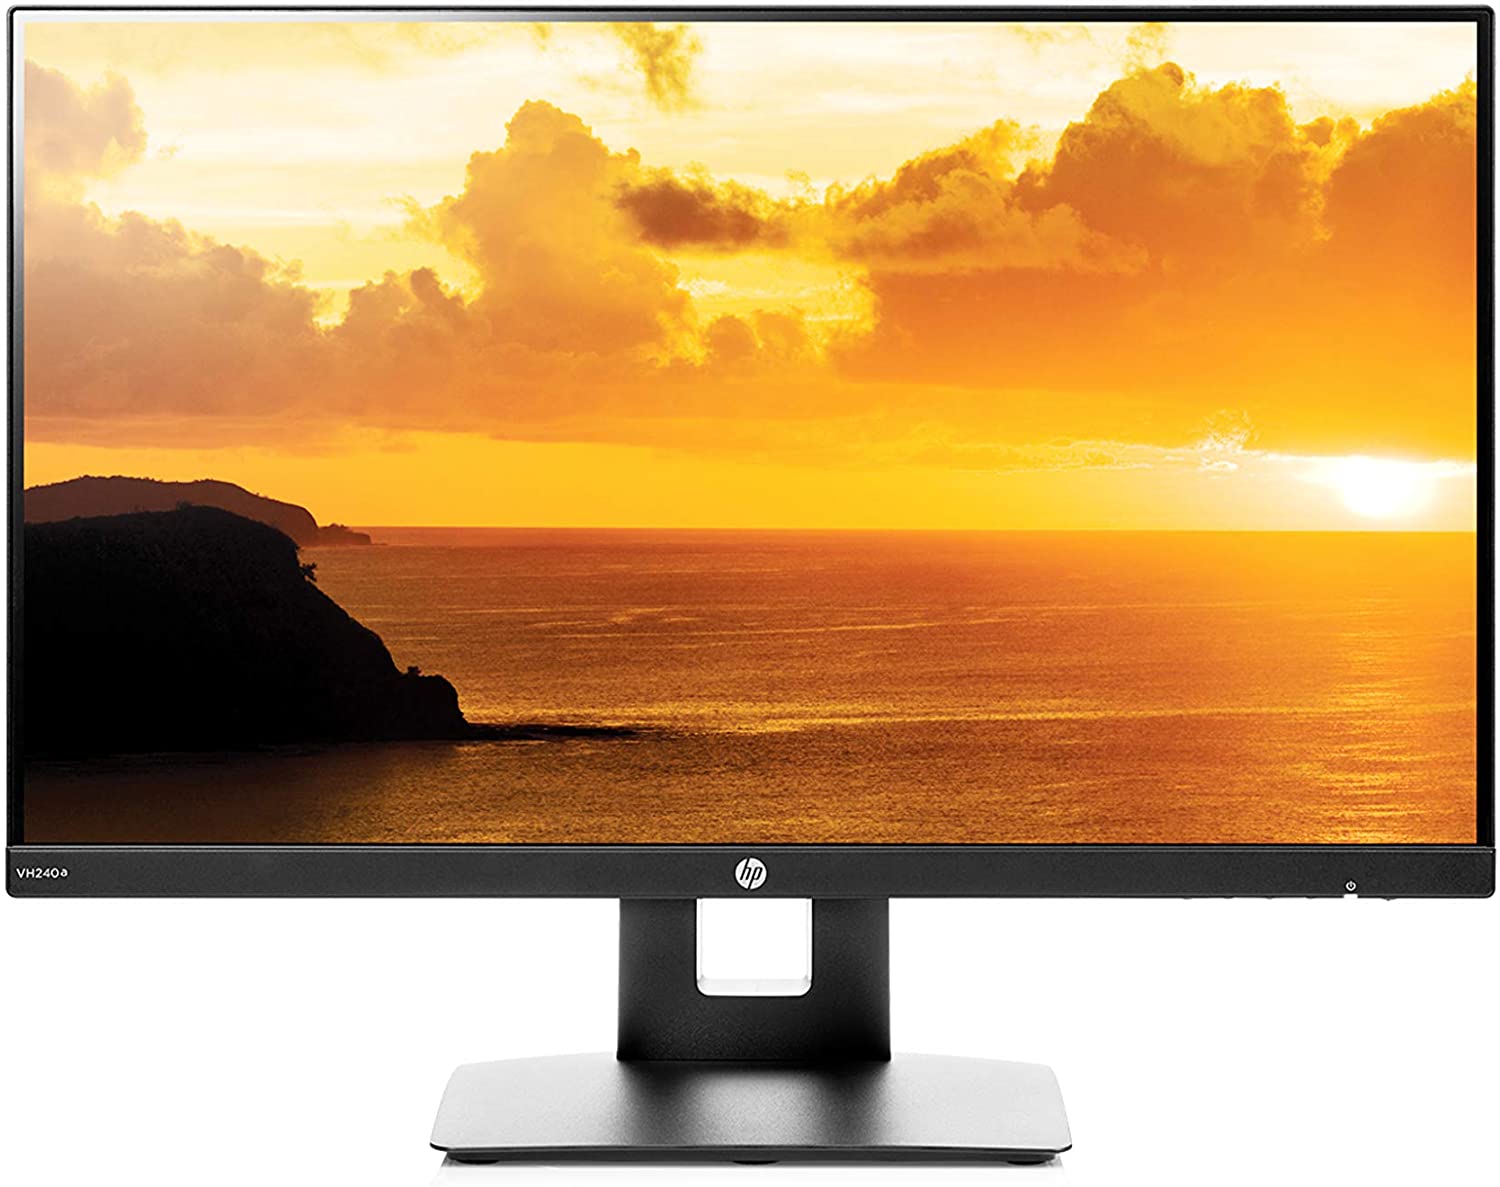 The HP VH240a monitor featuring an ocean sunrise desktop background on its screen.